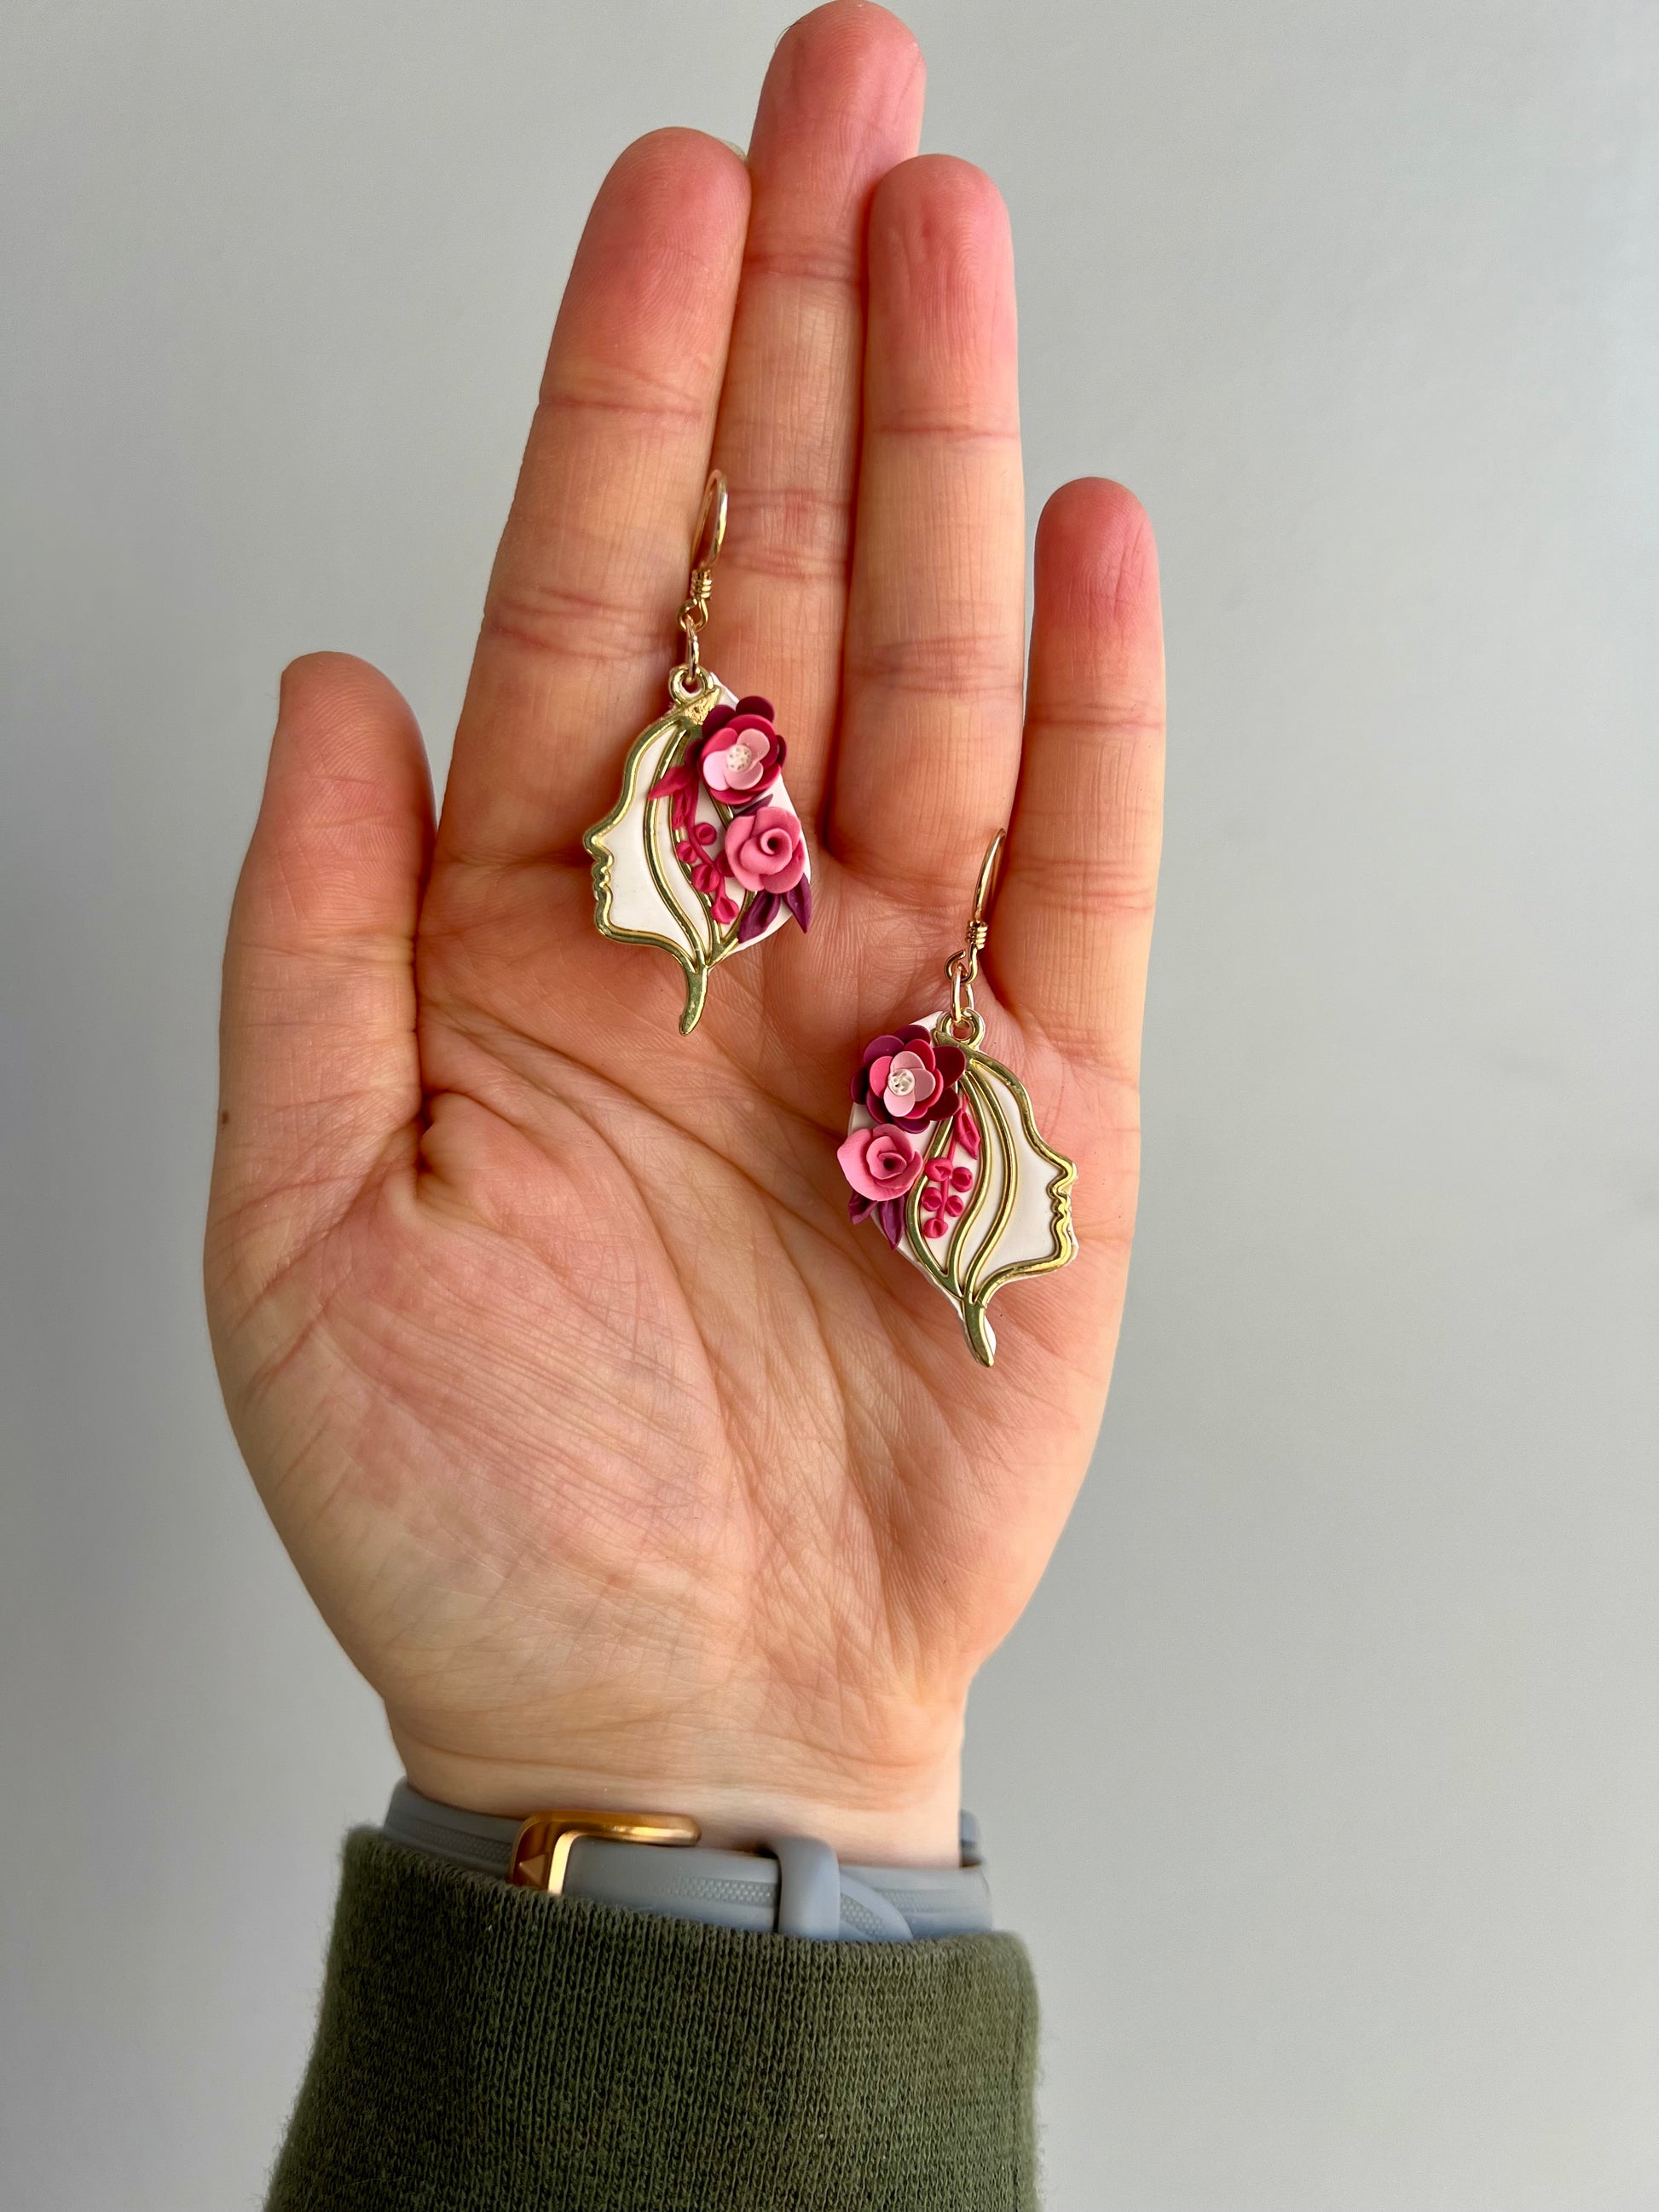 These earrings embody the wearer with the essence of the Norse goddess Freyja with these handmade earrings. Crafted from polymer clay, each delicate pink flower symbolizes love, fertility, and war, reflecting Freyja's diverse domains.